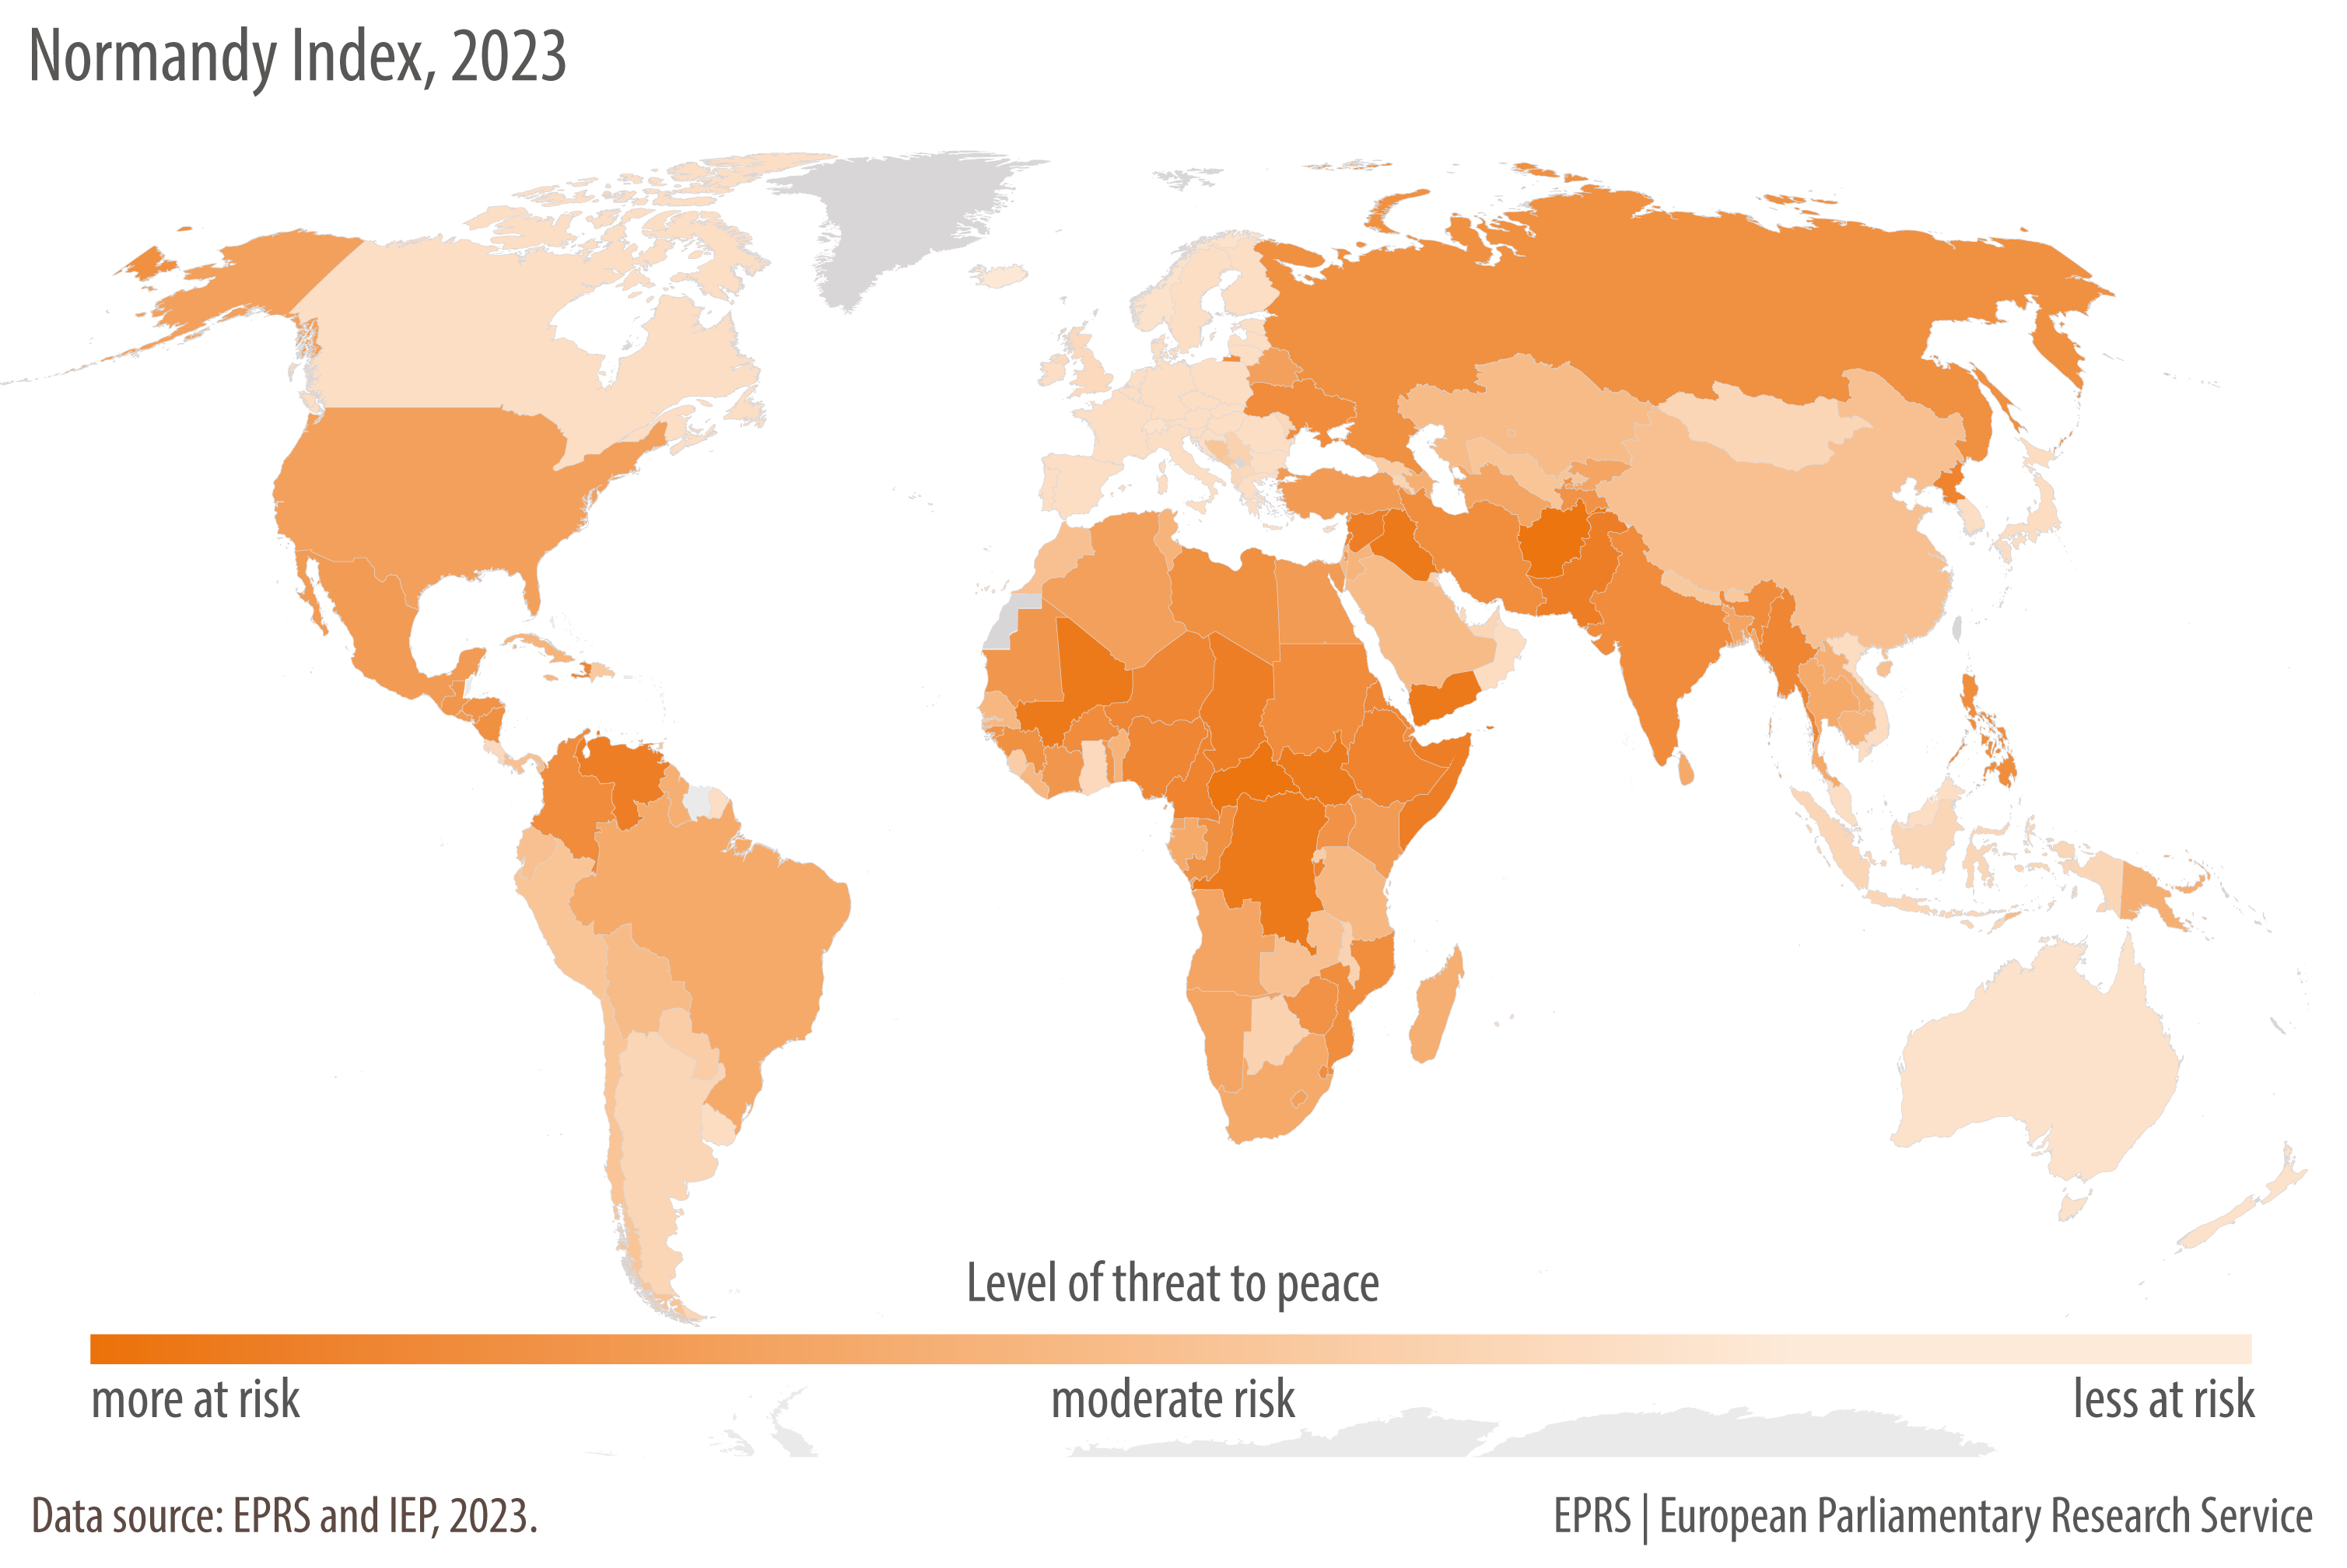 Mapping threats to peace and democracy worldwide: Normandy Index 2023